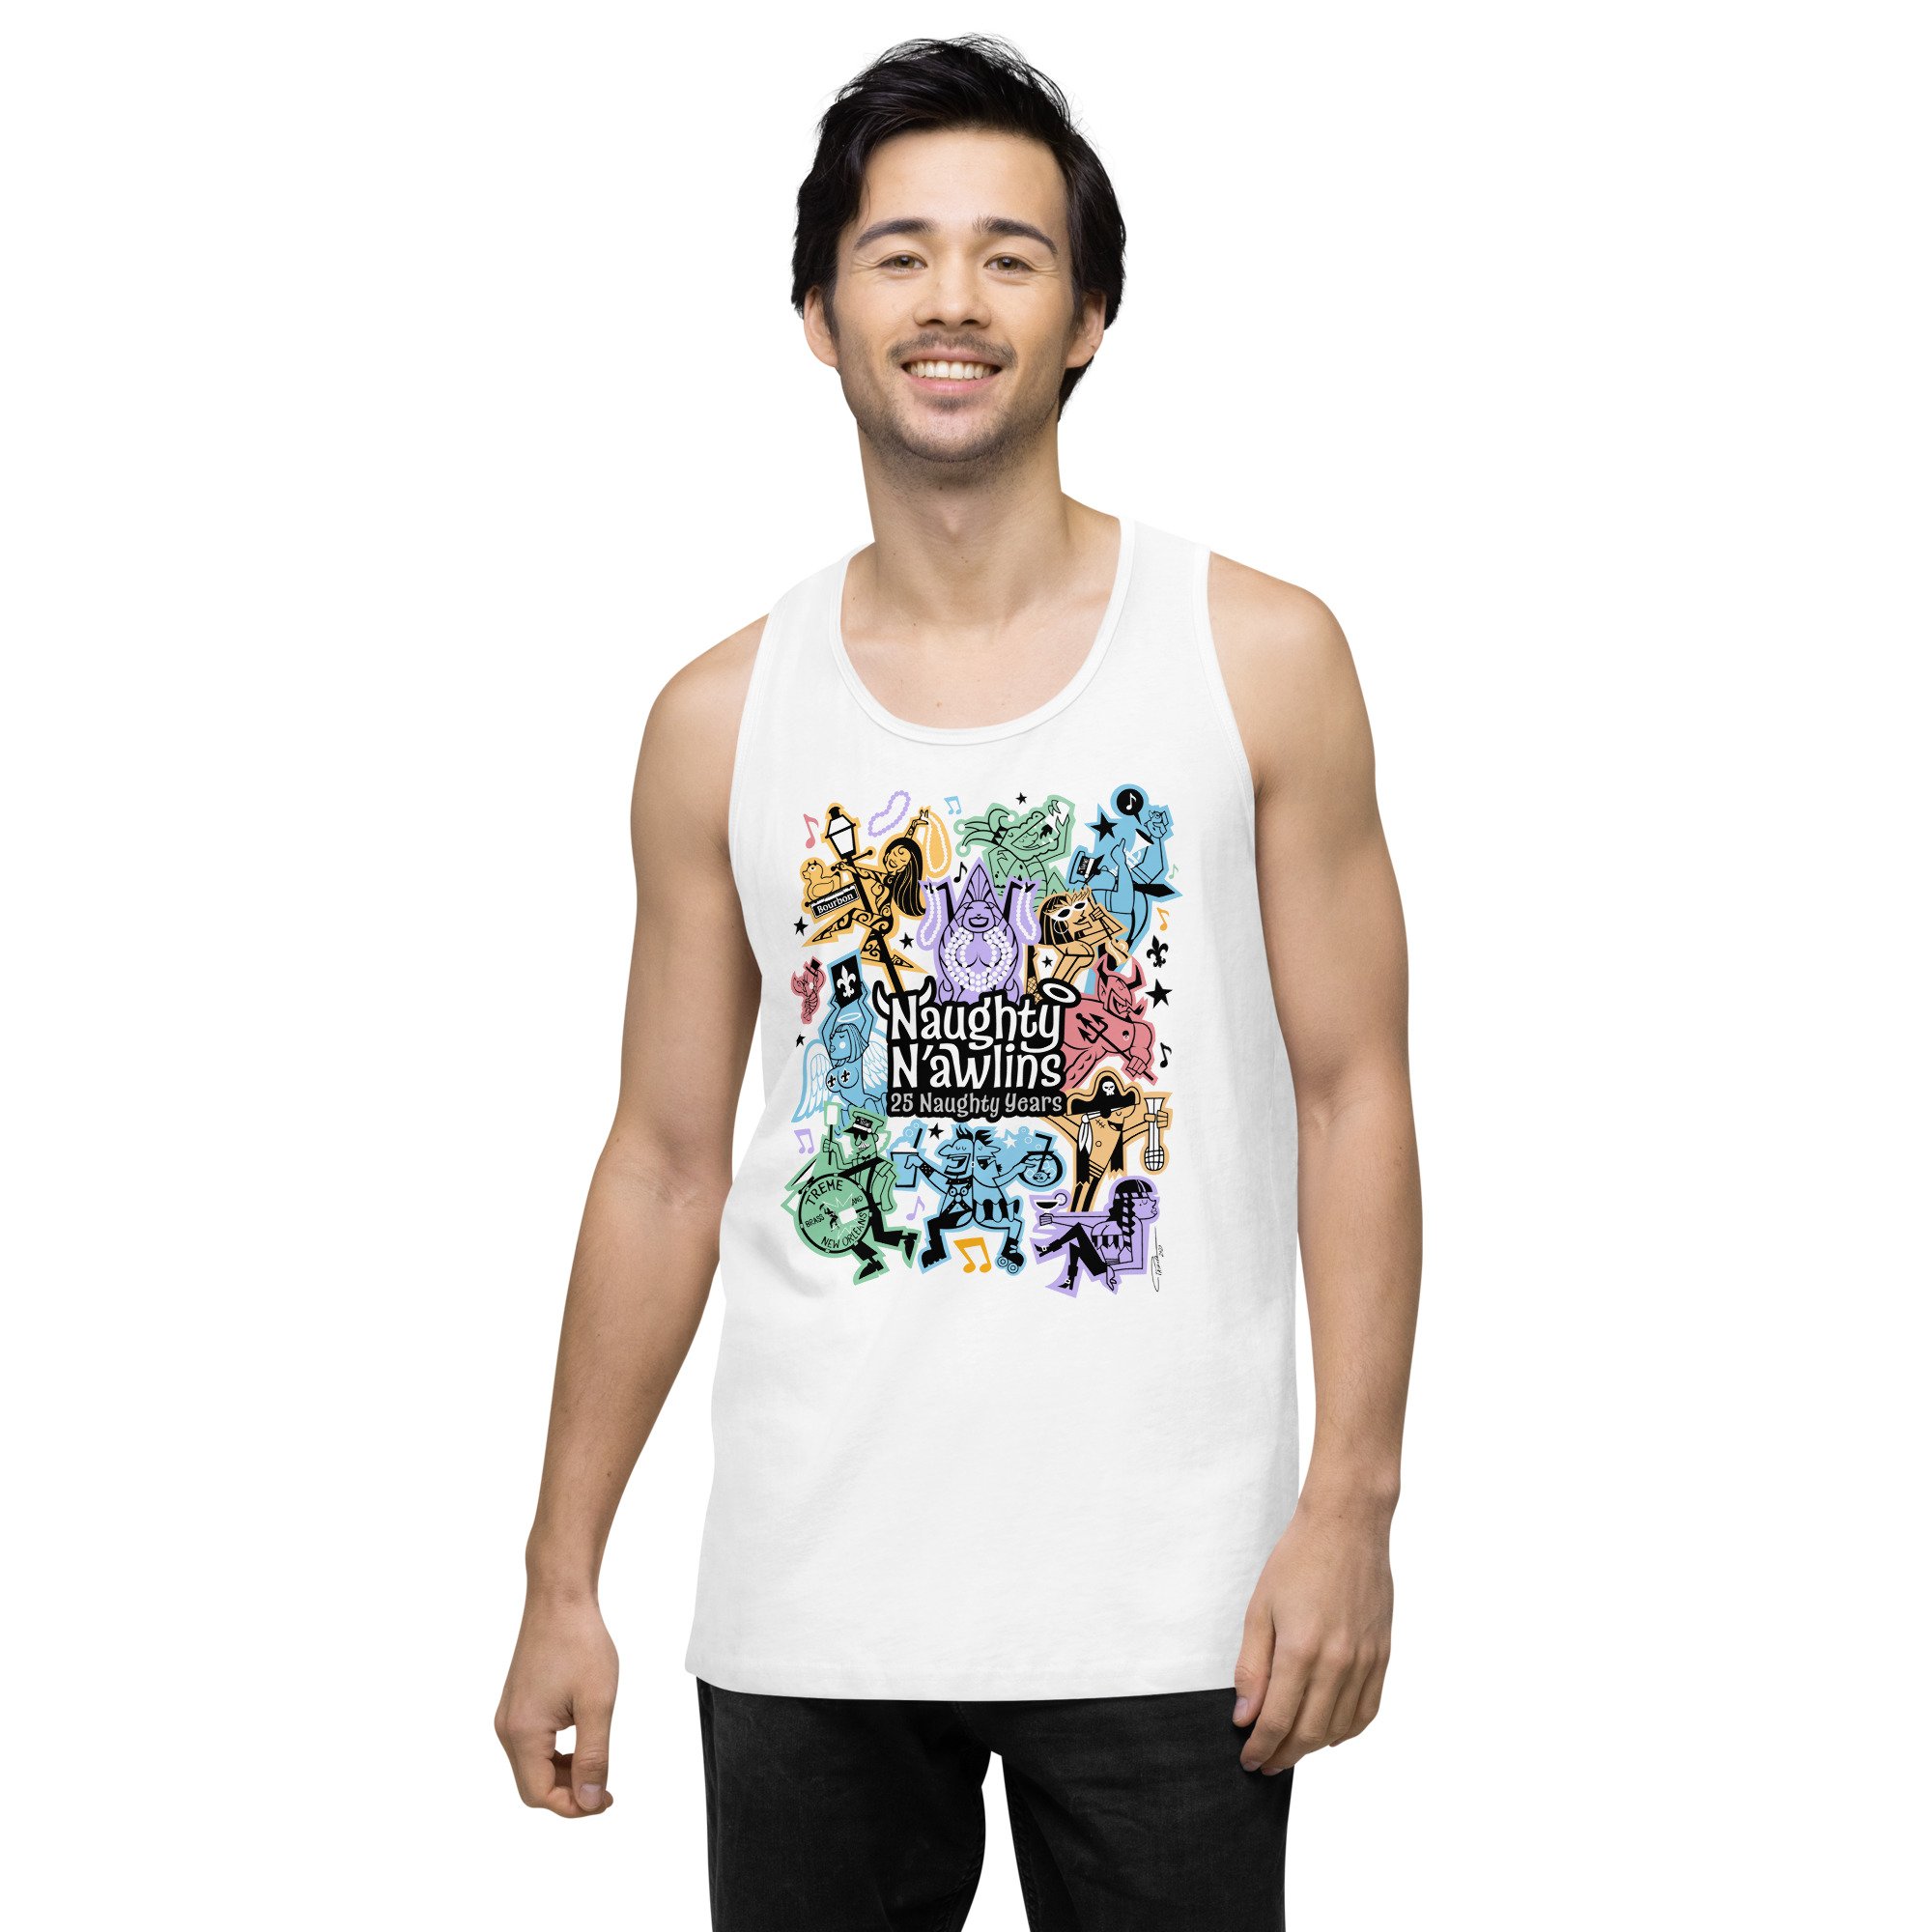 Naughty N'awlins 25 Years Men’s premium tank top — NAUGHTY EVENTS